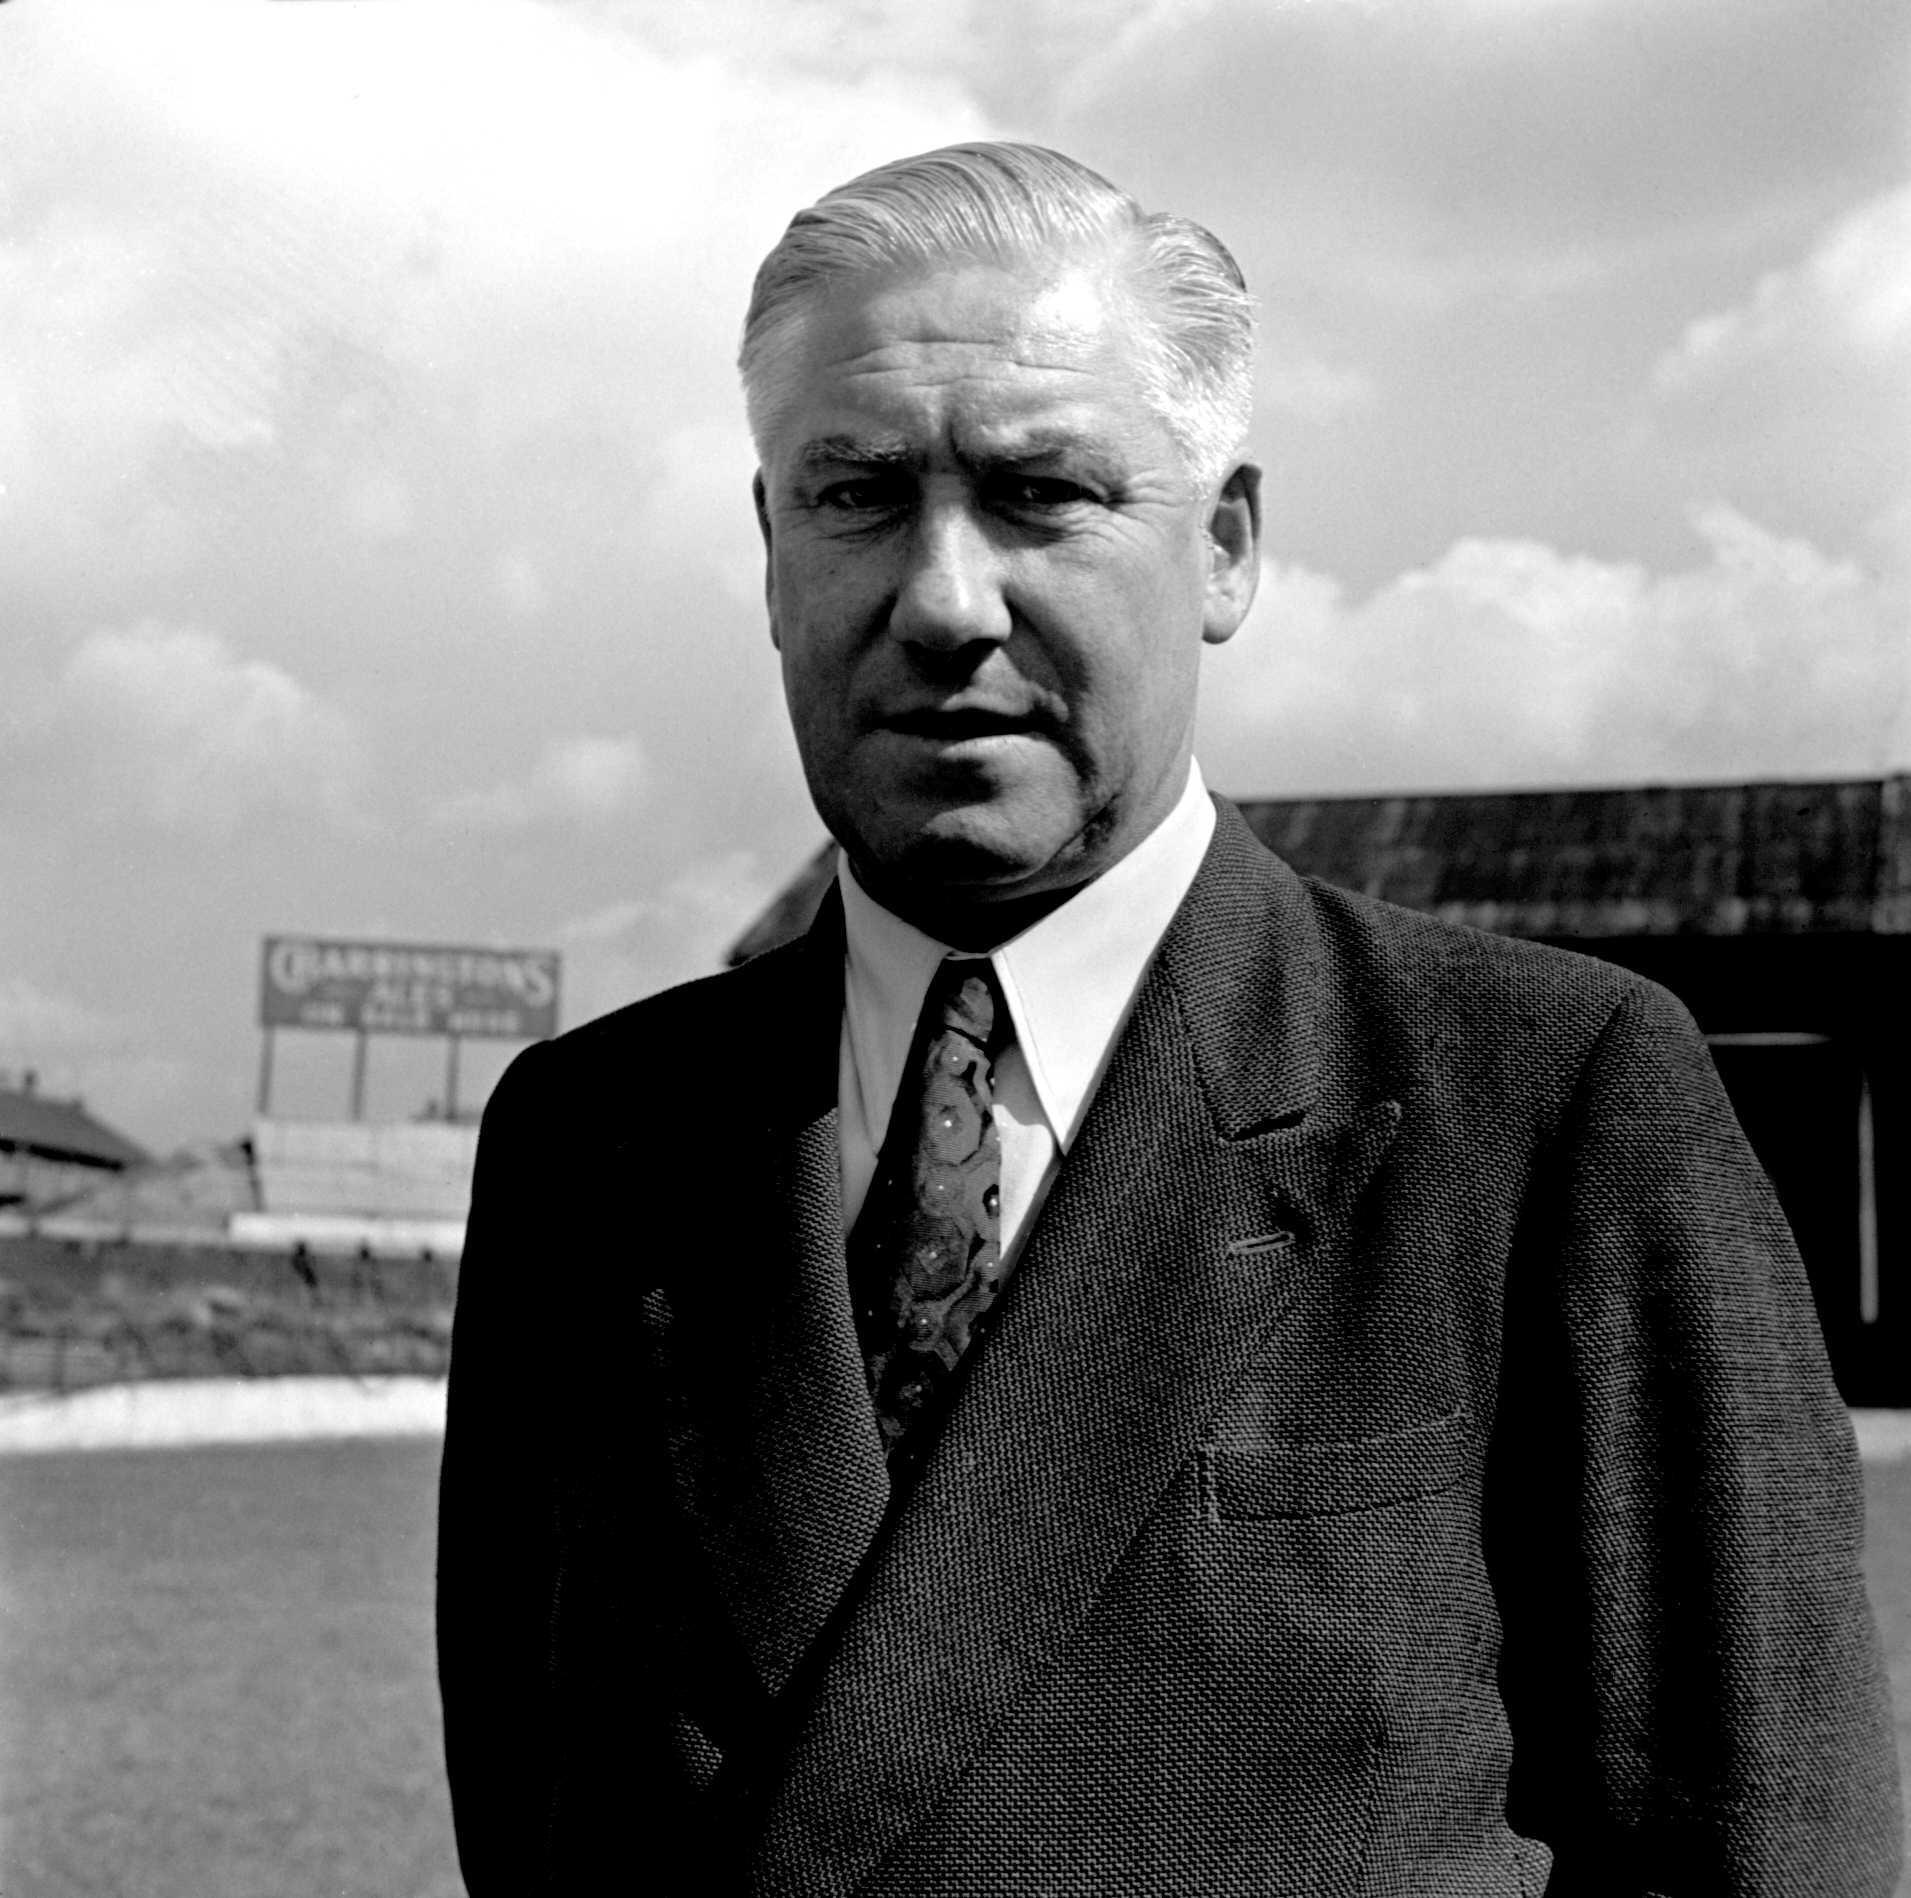 Jimmy Seed was appointed Charlton Manager on May 17th, 1933